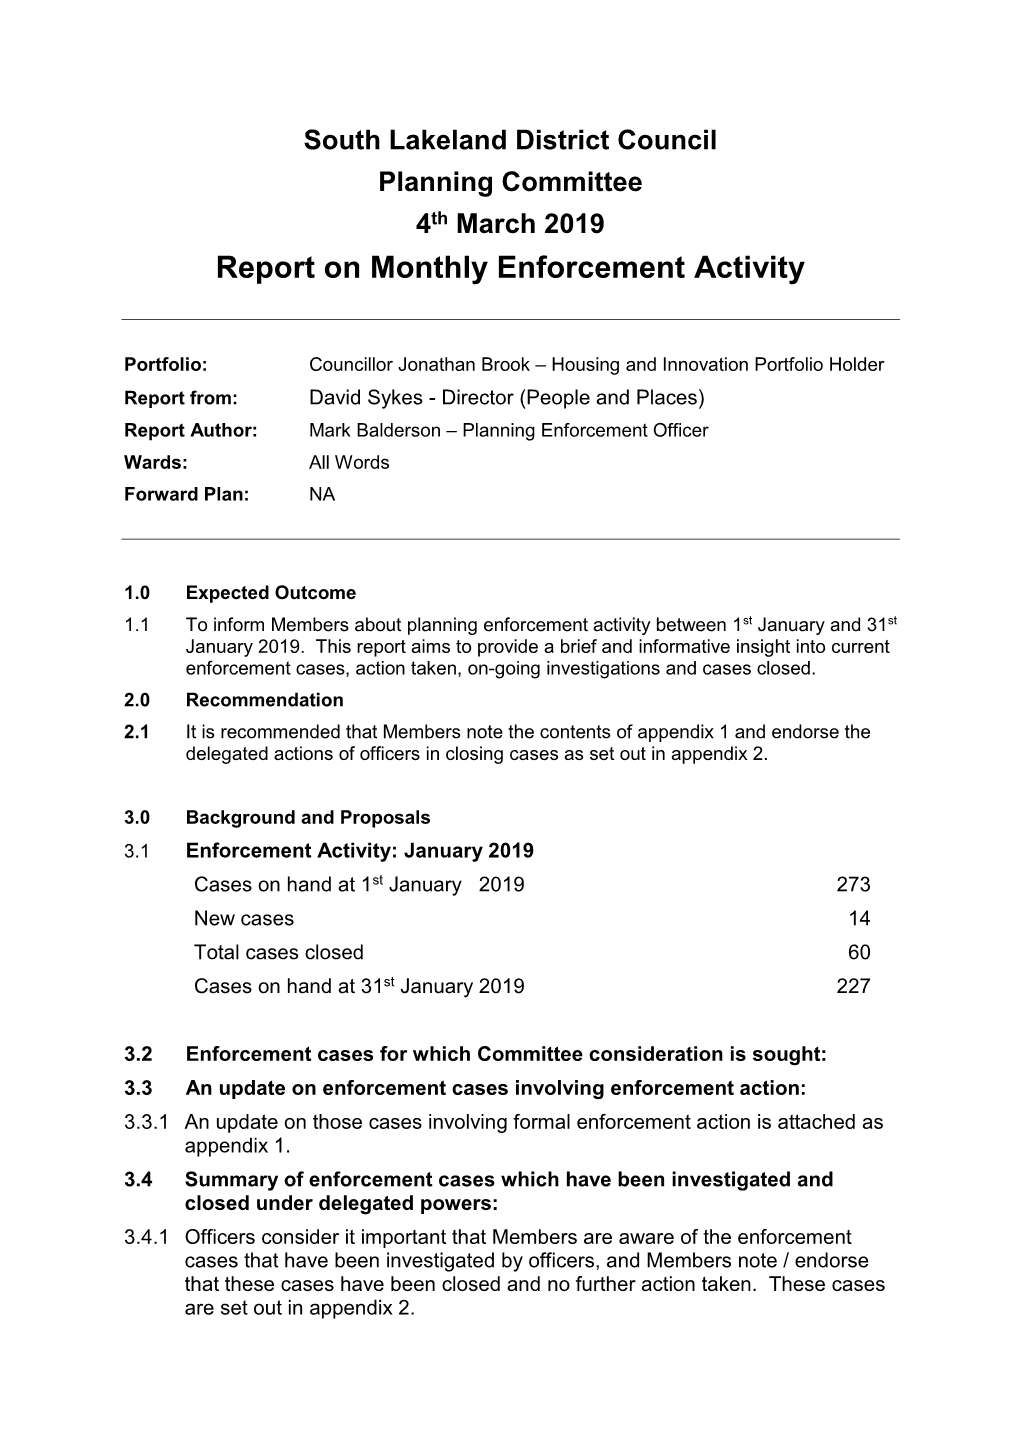 Report on Monthly Enforcement Activity